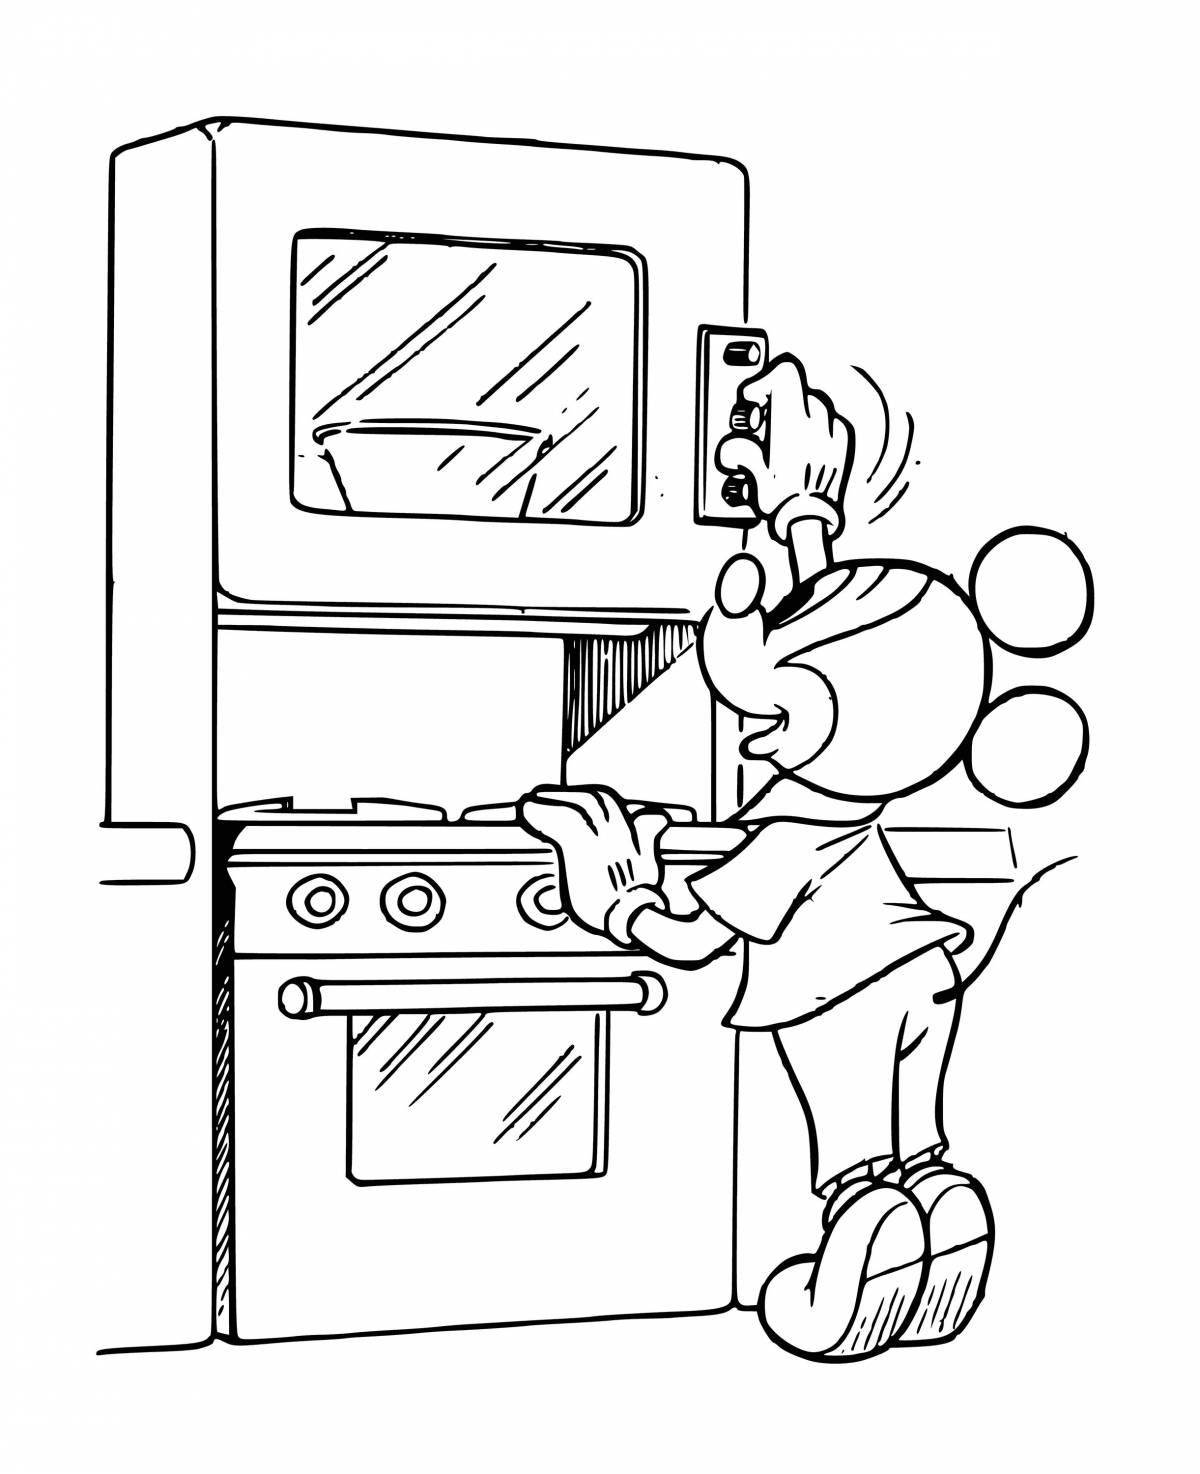 Happy Home Security Coloring Page